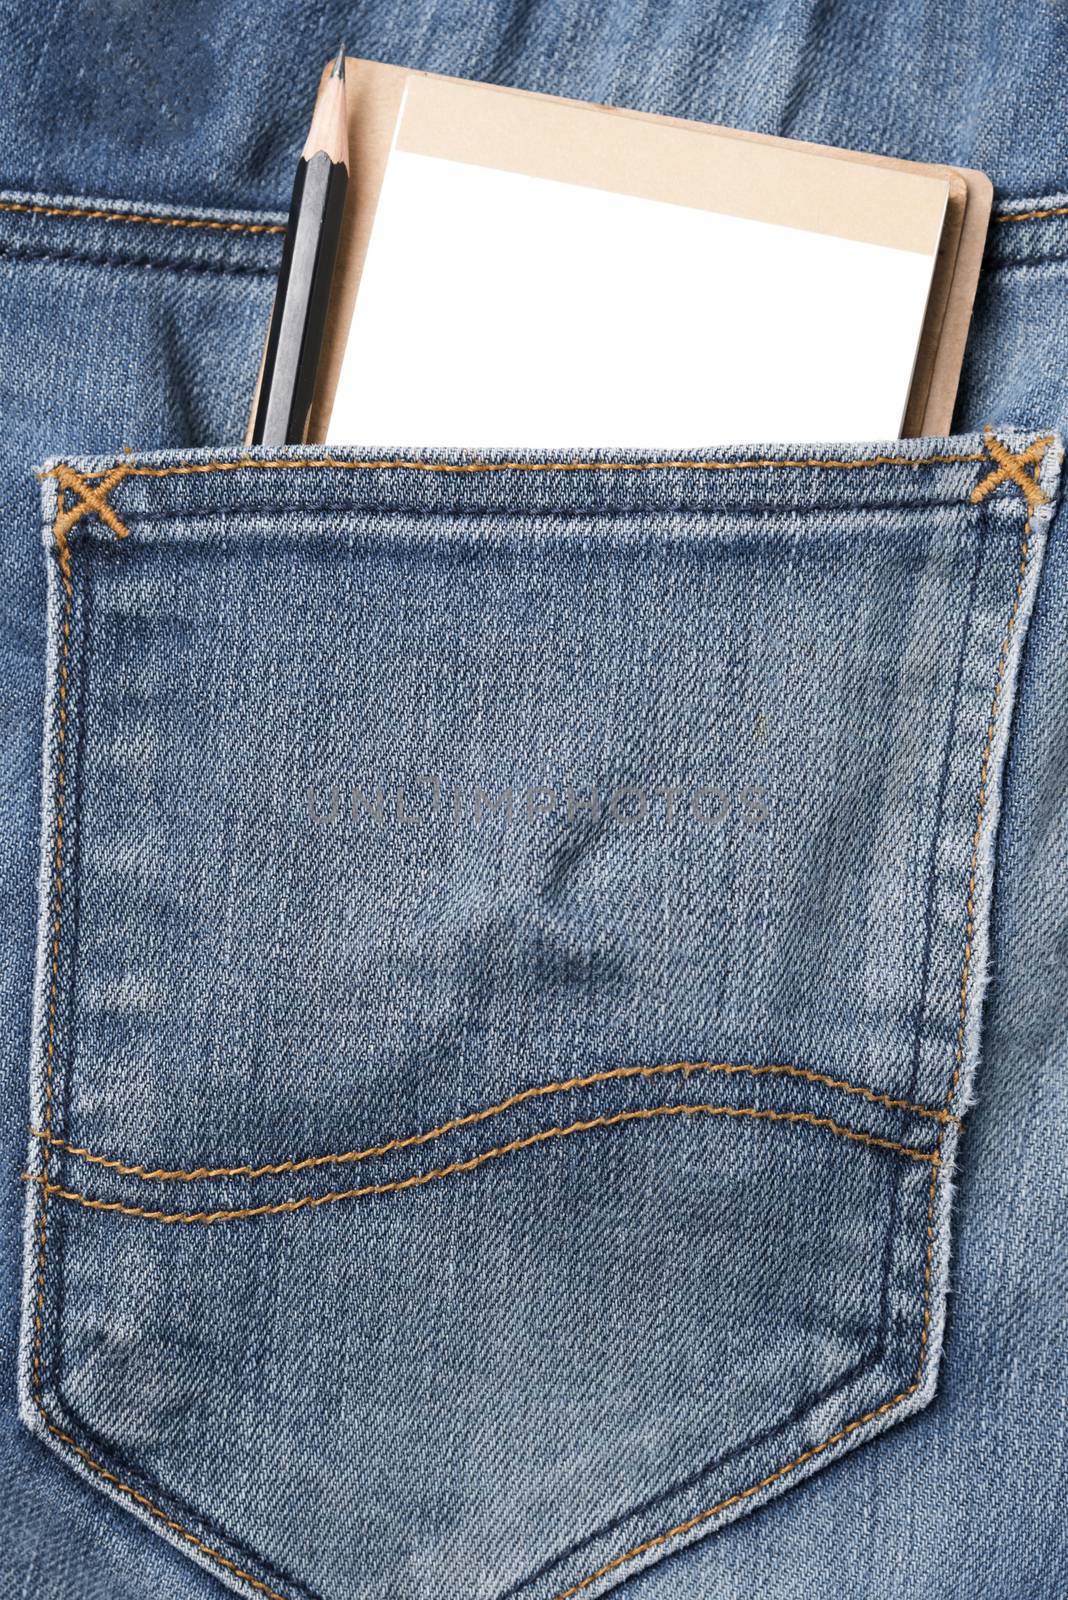 notebook and pencil in jean pocket